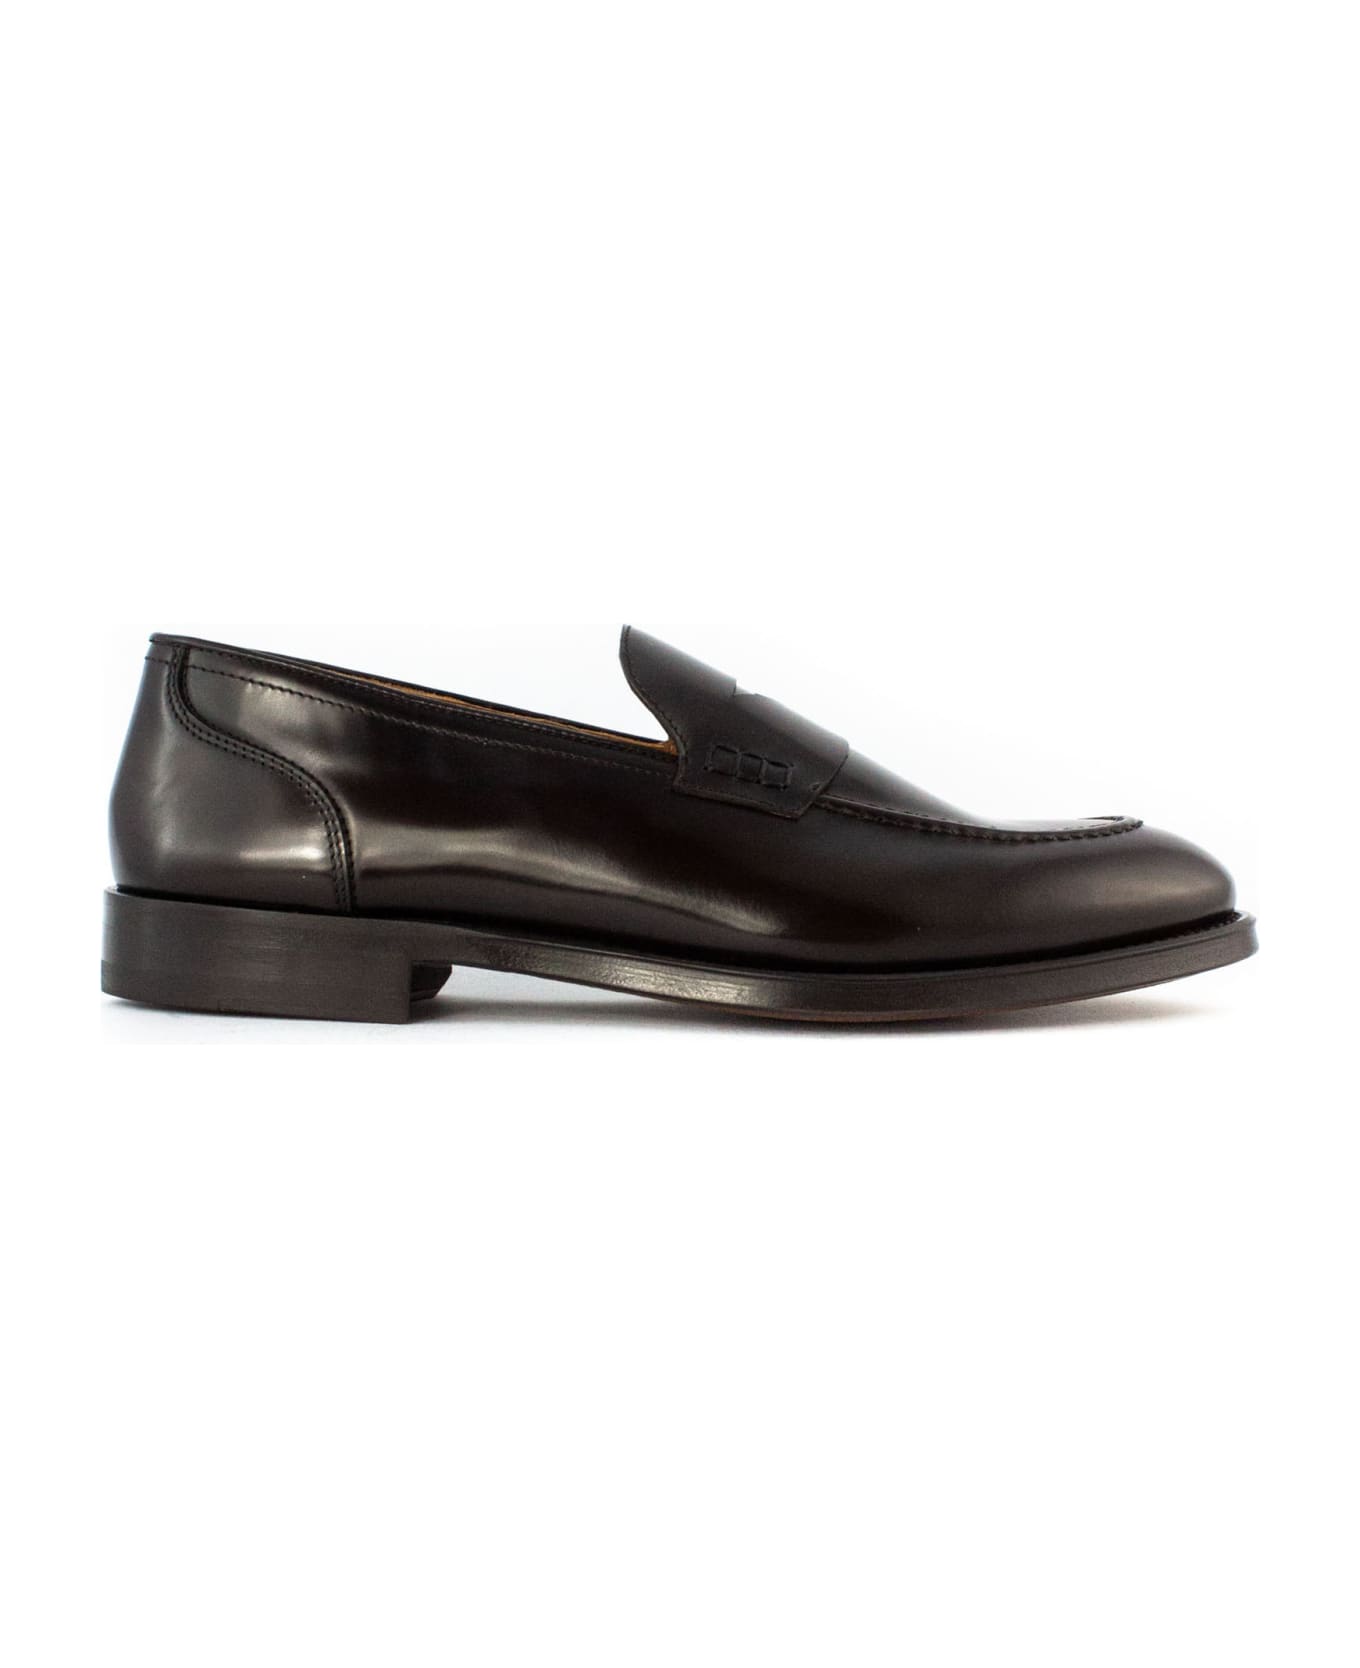 Doucal's Penny Loafer In Dark Brown Leather - Brown